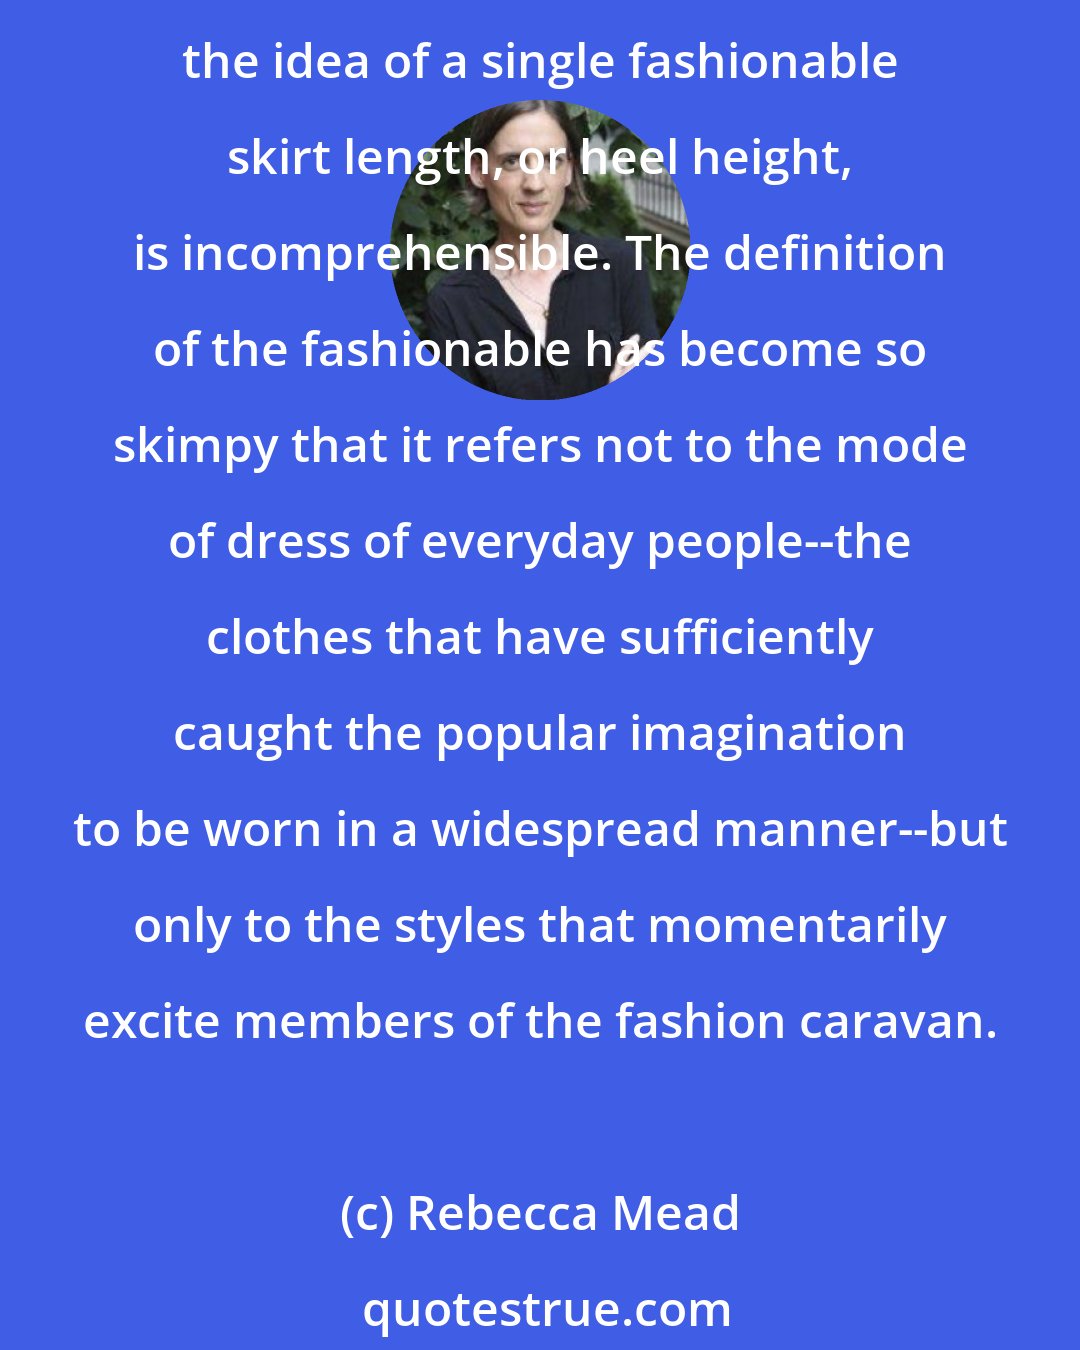 Rebecca Mead: While the fashion industry may, at least at the top end, be thriving, the notion of fashion itself is becoming more and more meaningless. Any discipline in fashion has long since evaporated; the idea of a single fashionable skirt length, or heel height, is incomprehensible. The definition of the fashionable has become so skimpy that it refers not to the mode of dress of everyday people--the clothes that have sufficiently caught the popular imagination to be worn in a widespread manner--but only to the styles that momentarily excite members of the fashion caravan.